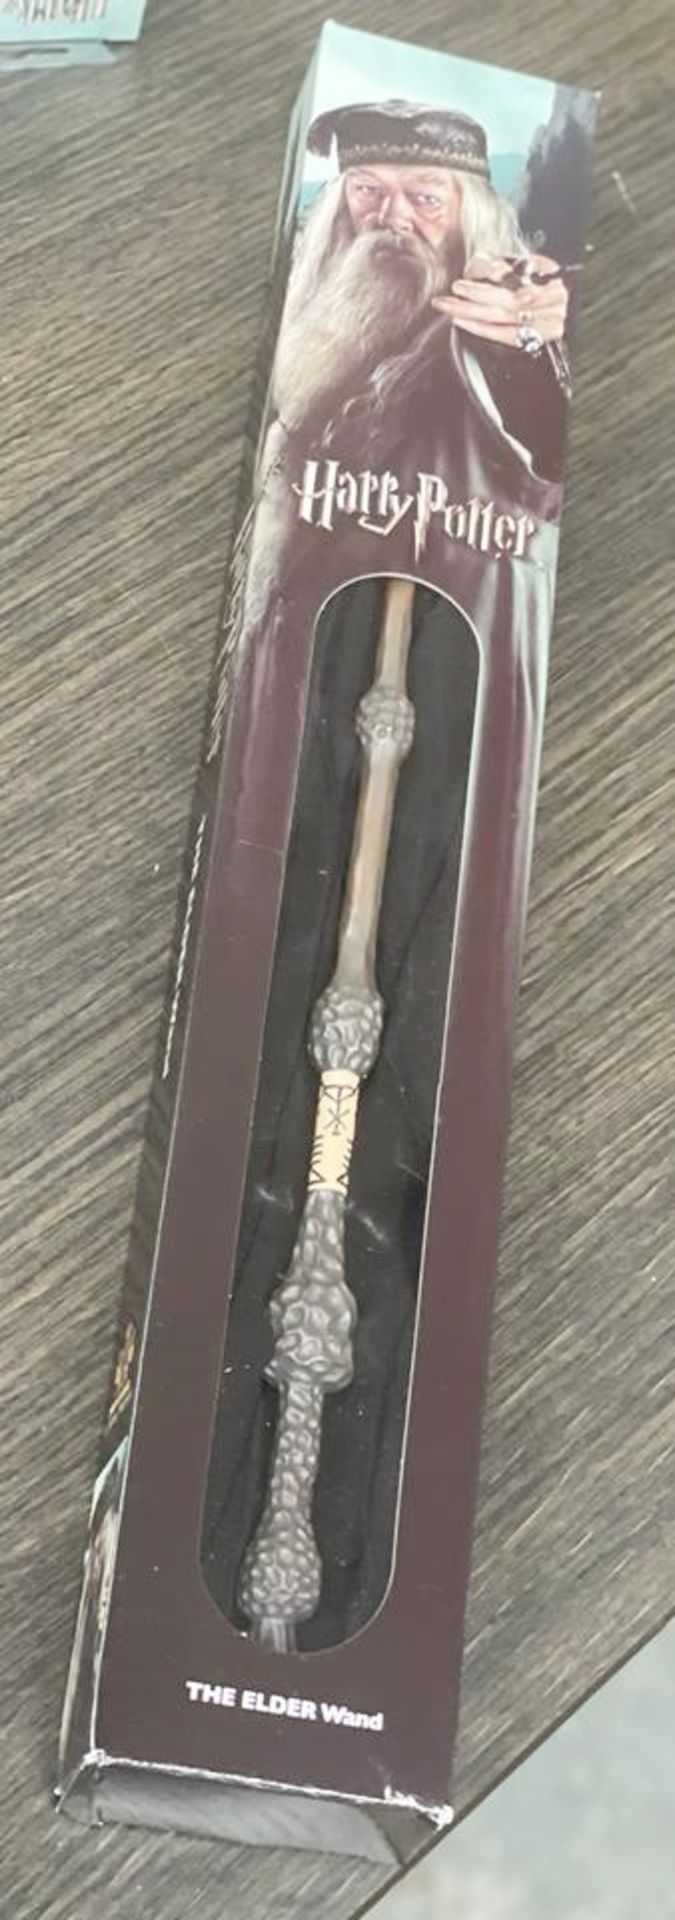 2 x  Harry Potter Toy's  - Harry Potter The Elder Wand And The Noble Collection Harry Potter - Image 2 of 4